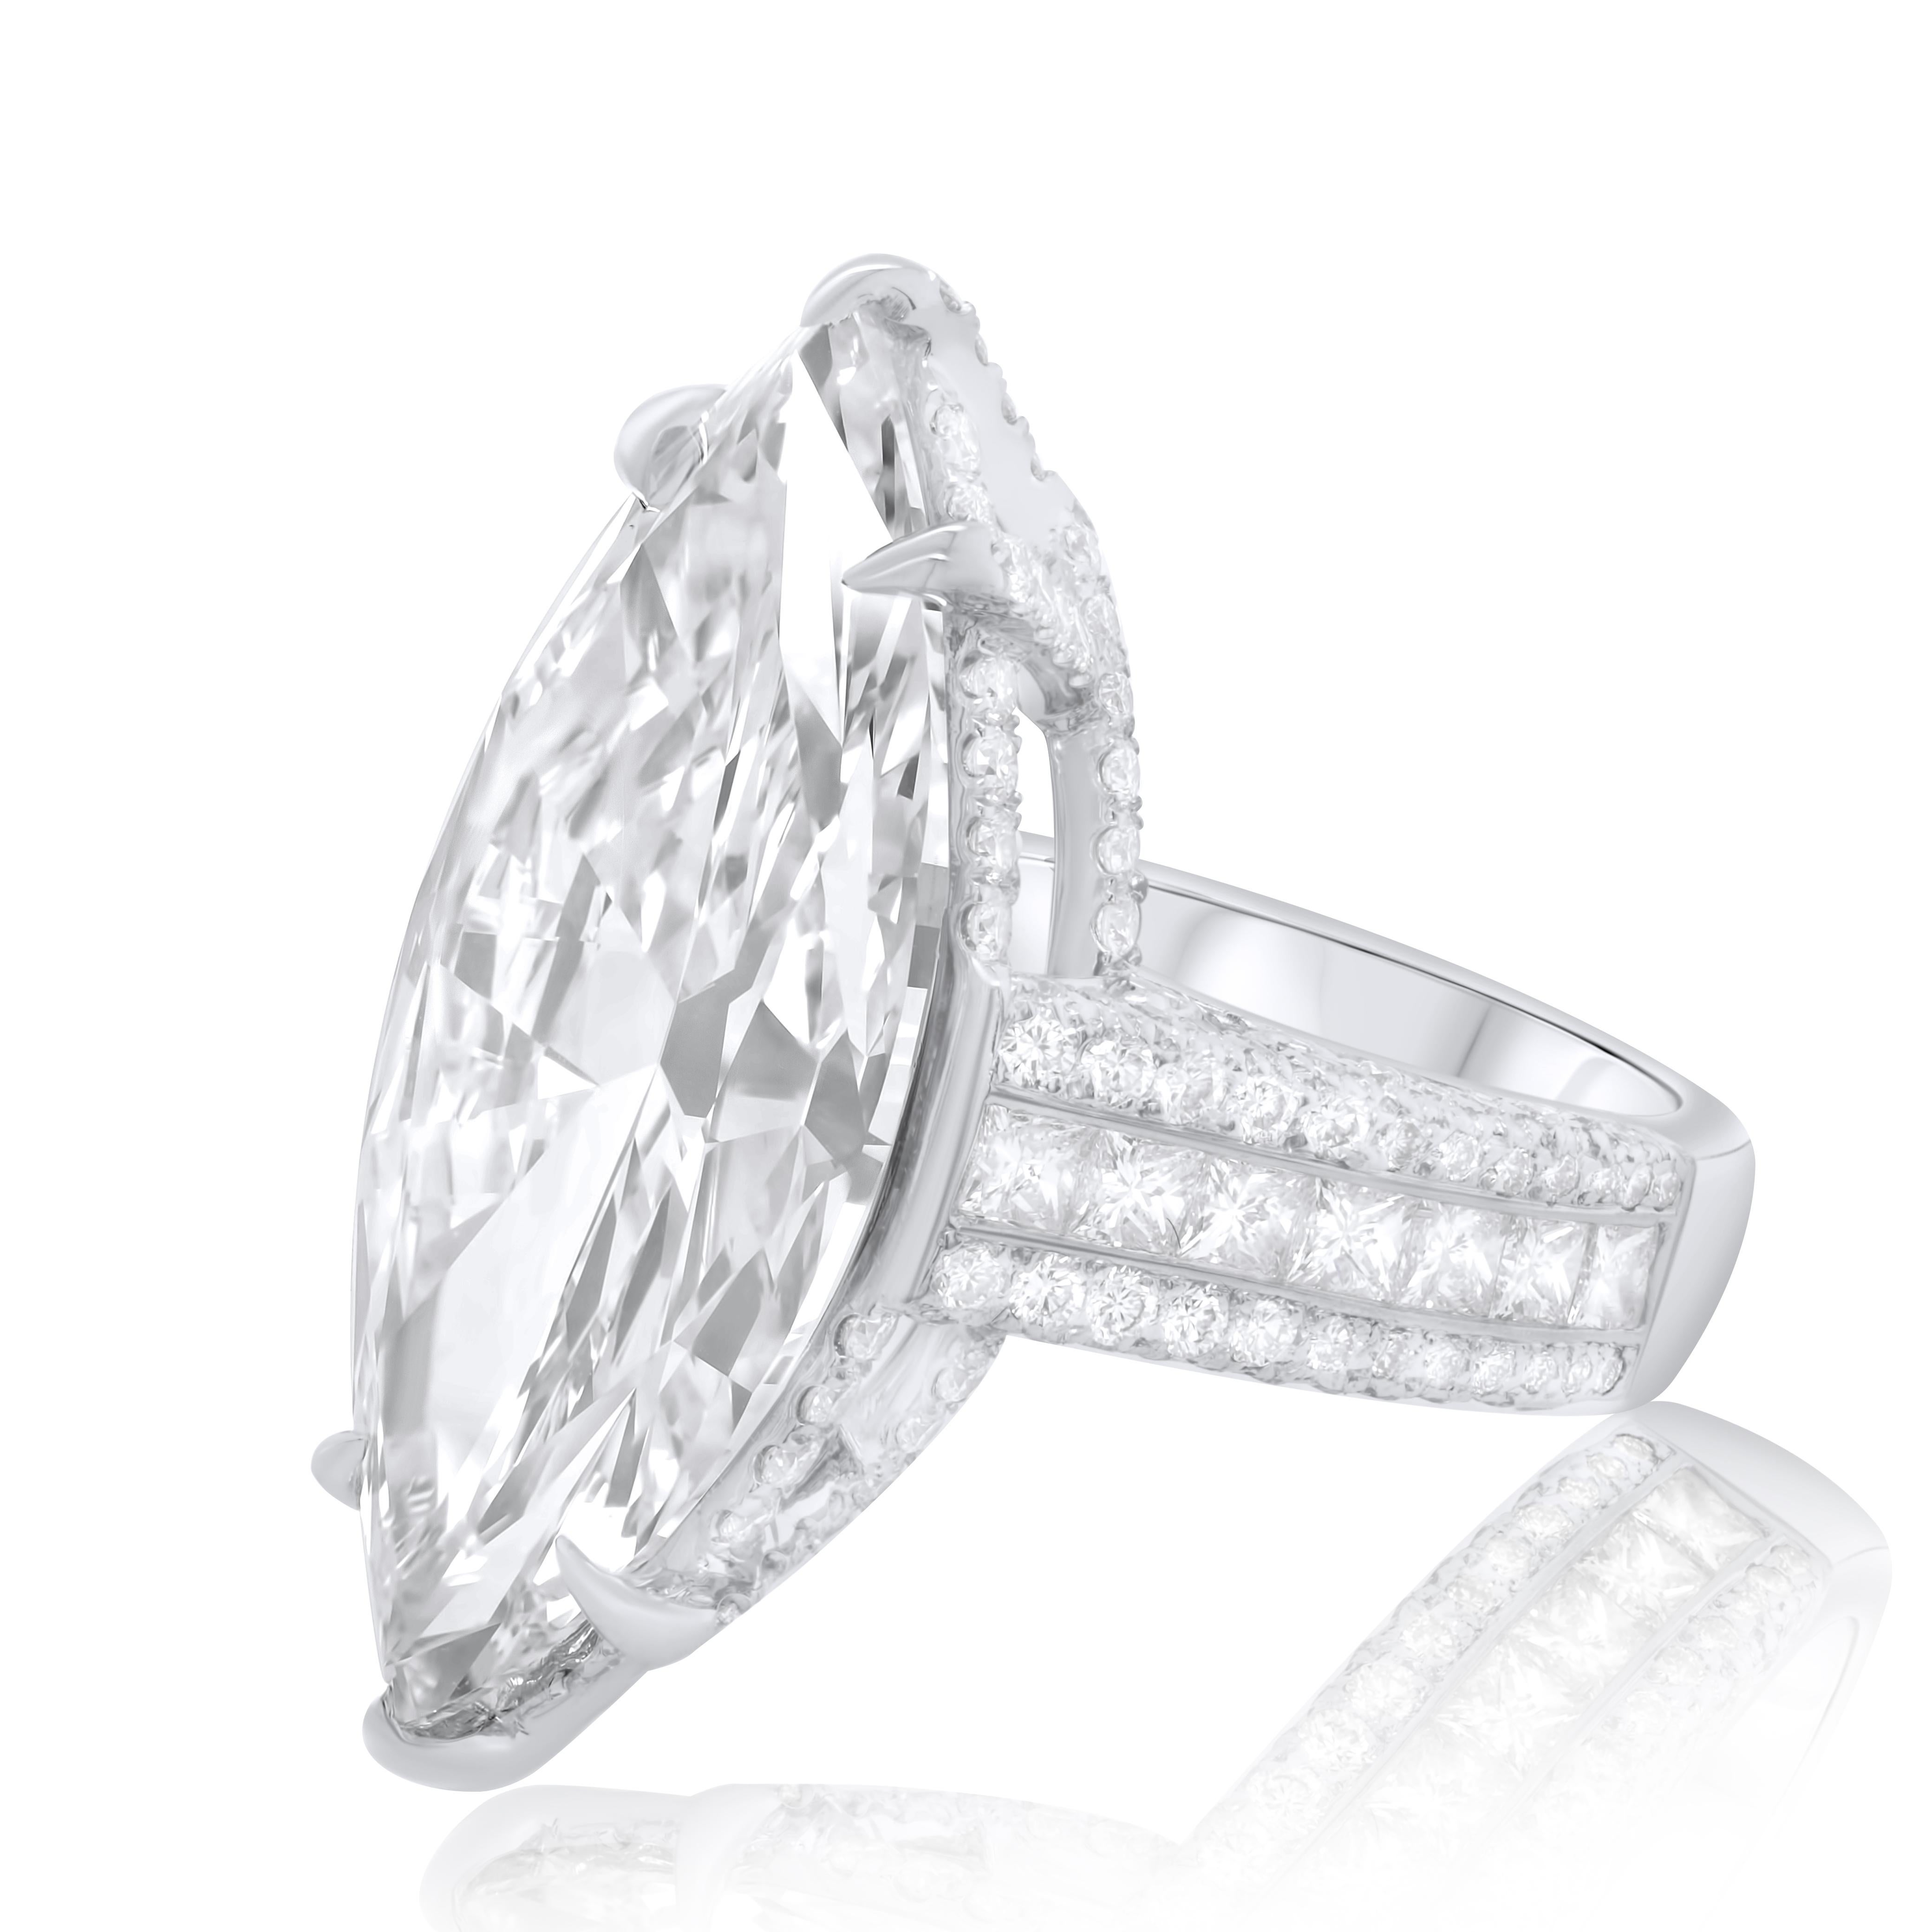 Diana M. 19.85 Carat Marquise Cut Flawless Diamond Ring For Sale 2